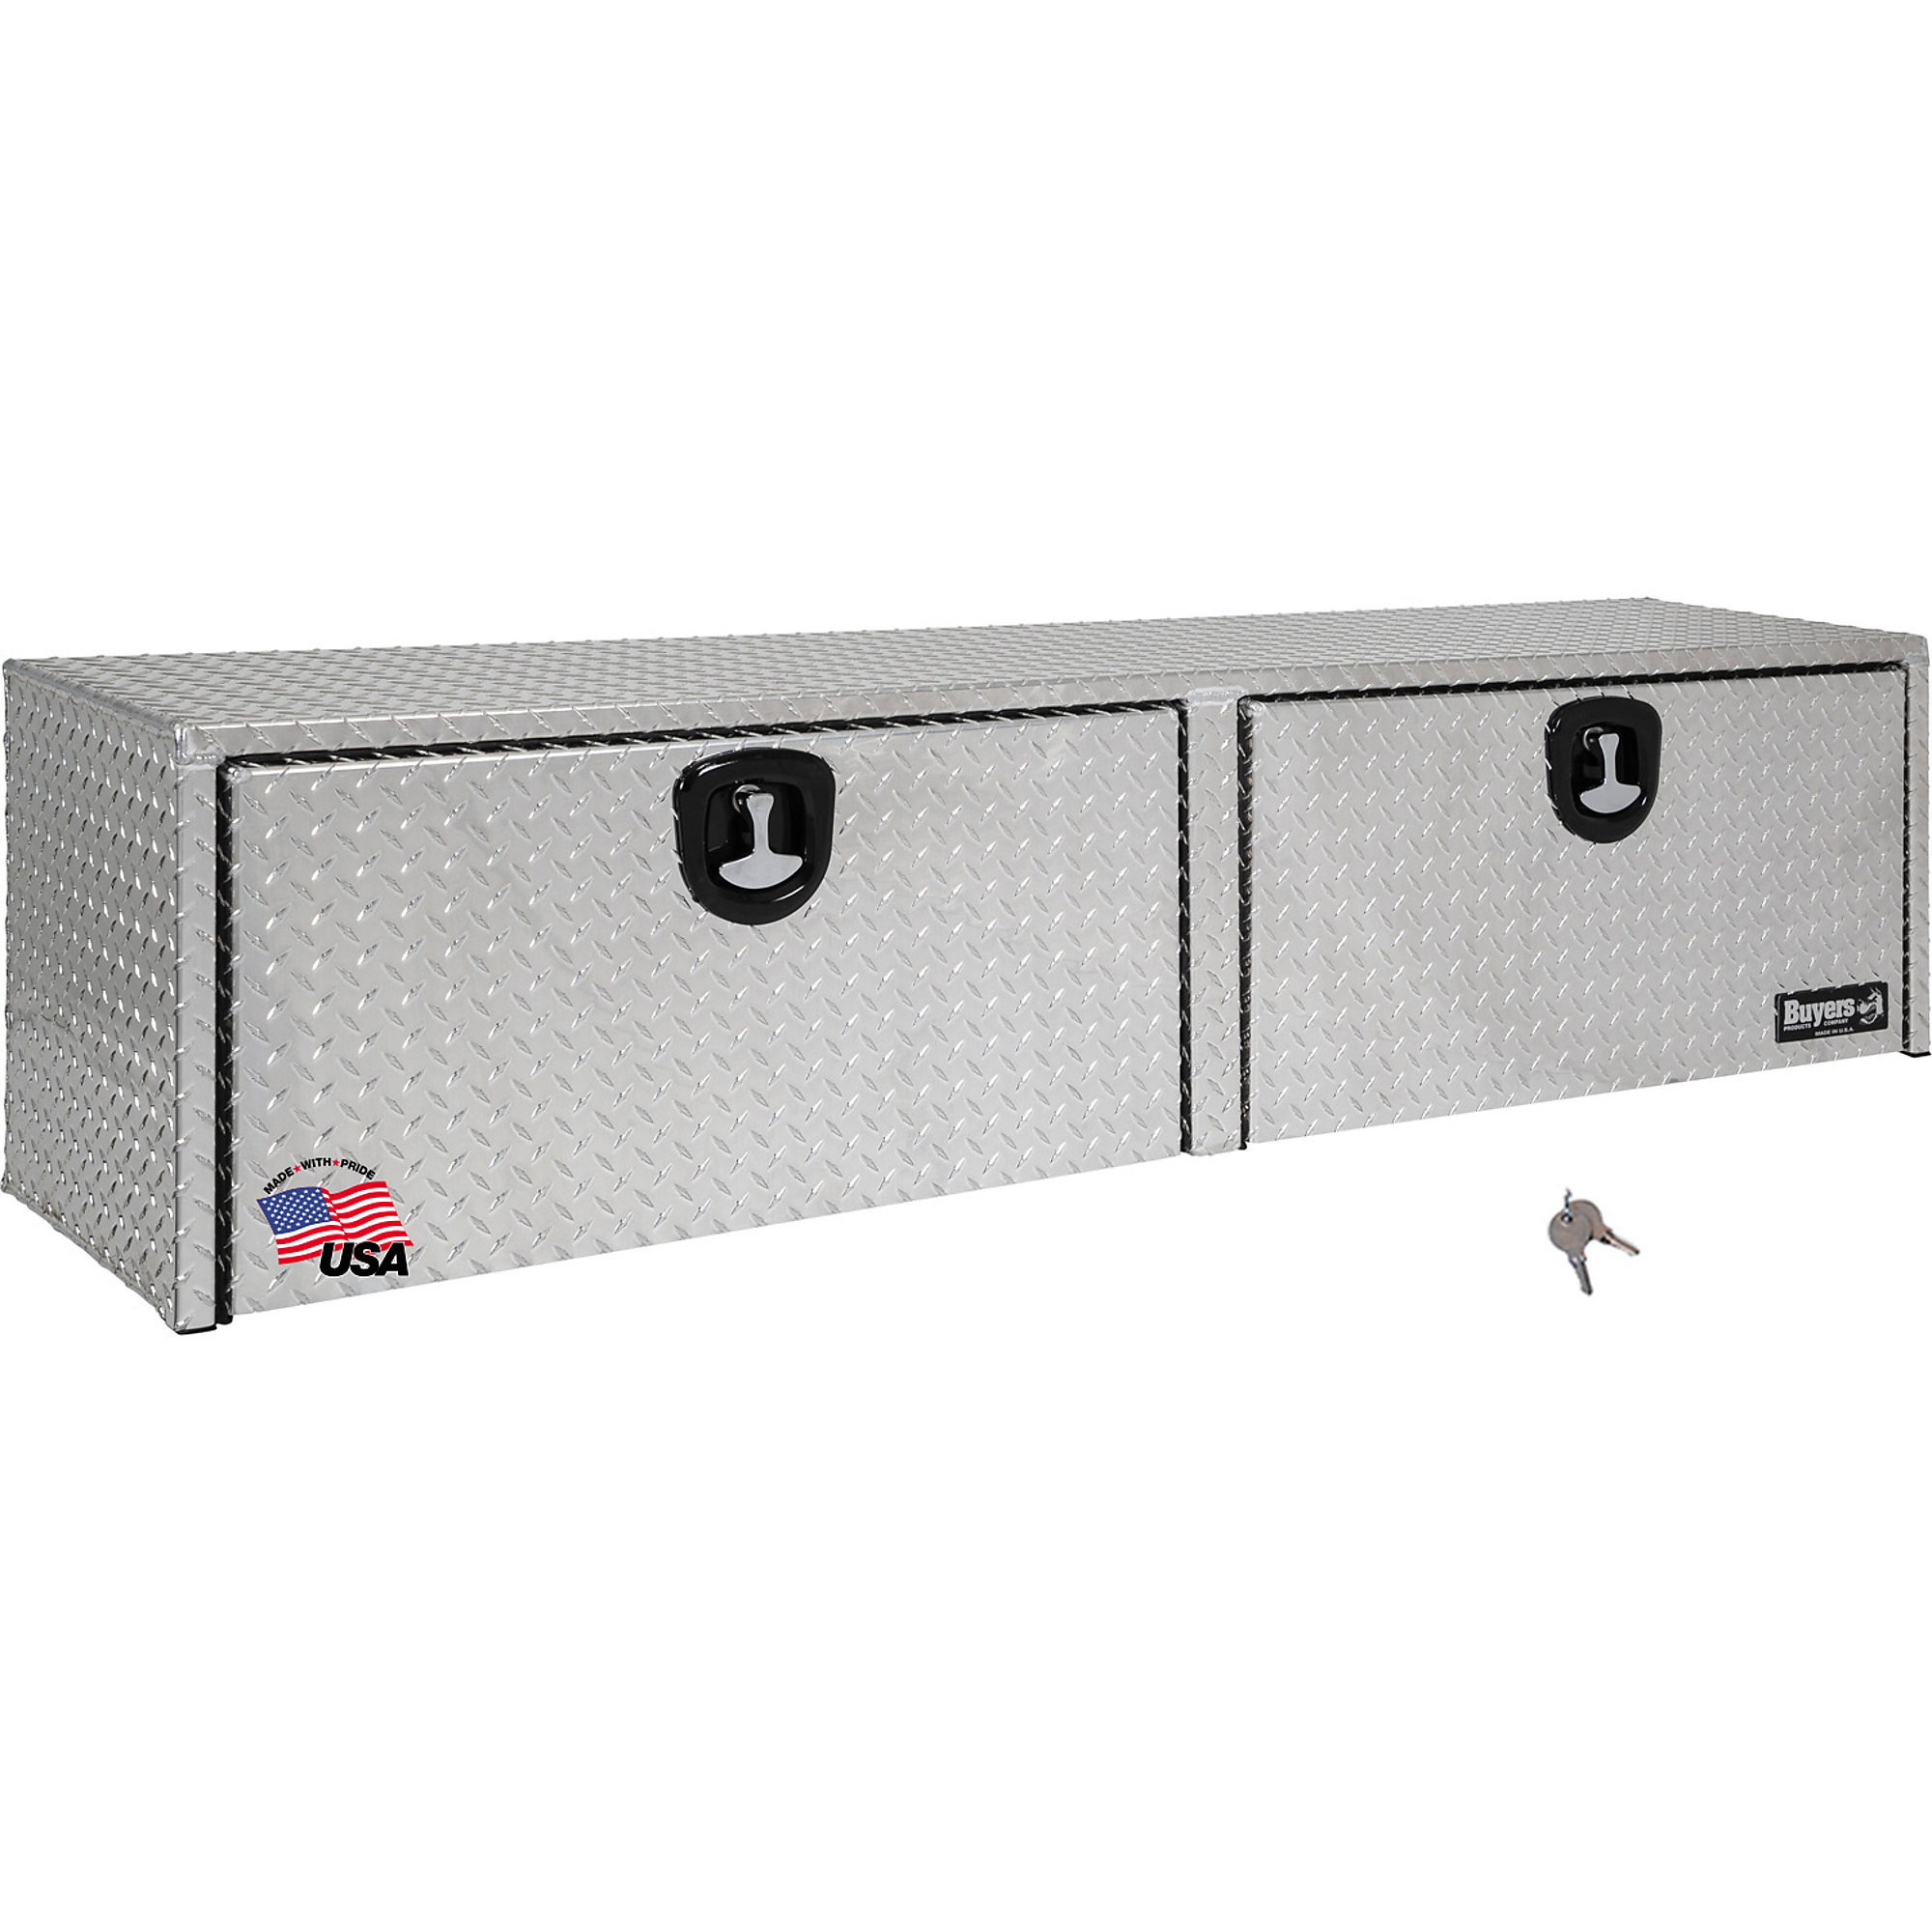 Buyers Products Topsider Truck Box, 72Inch Aluminum, Diamond Plate Silver, Model 1701551